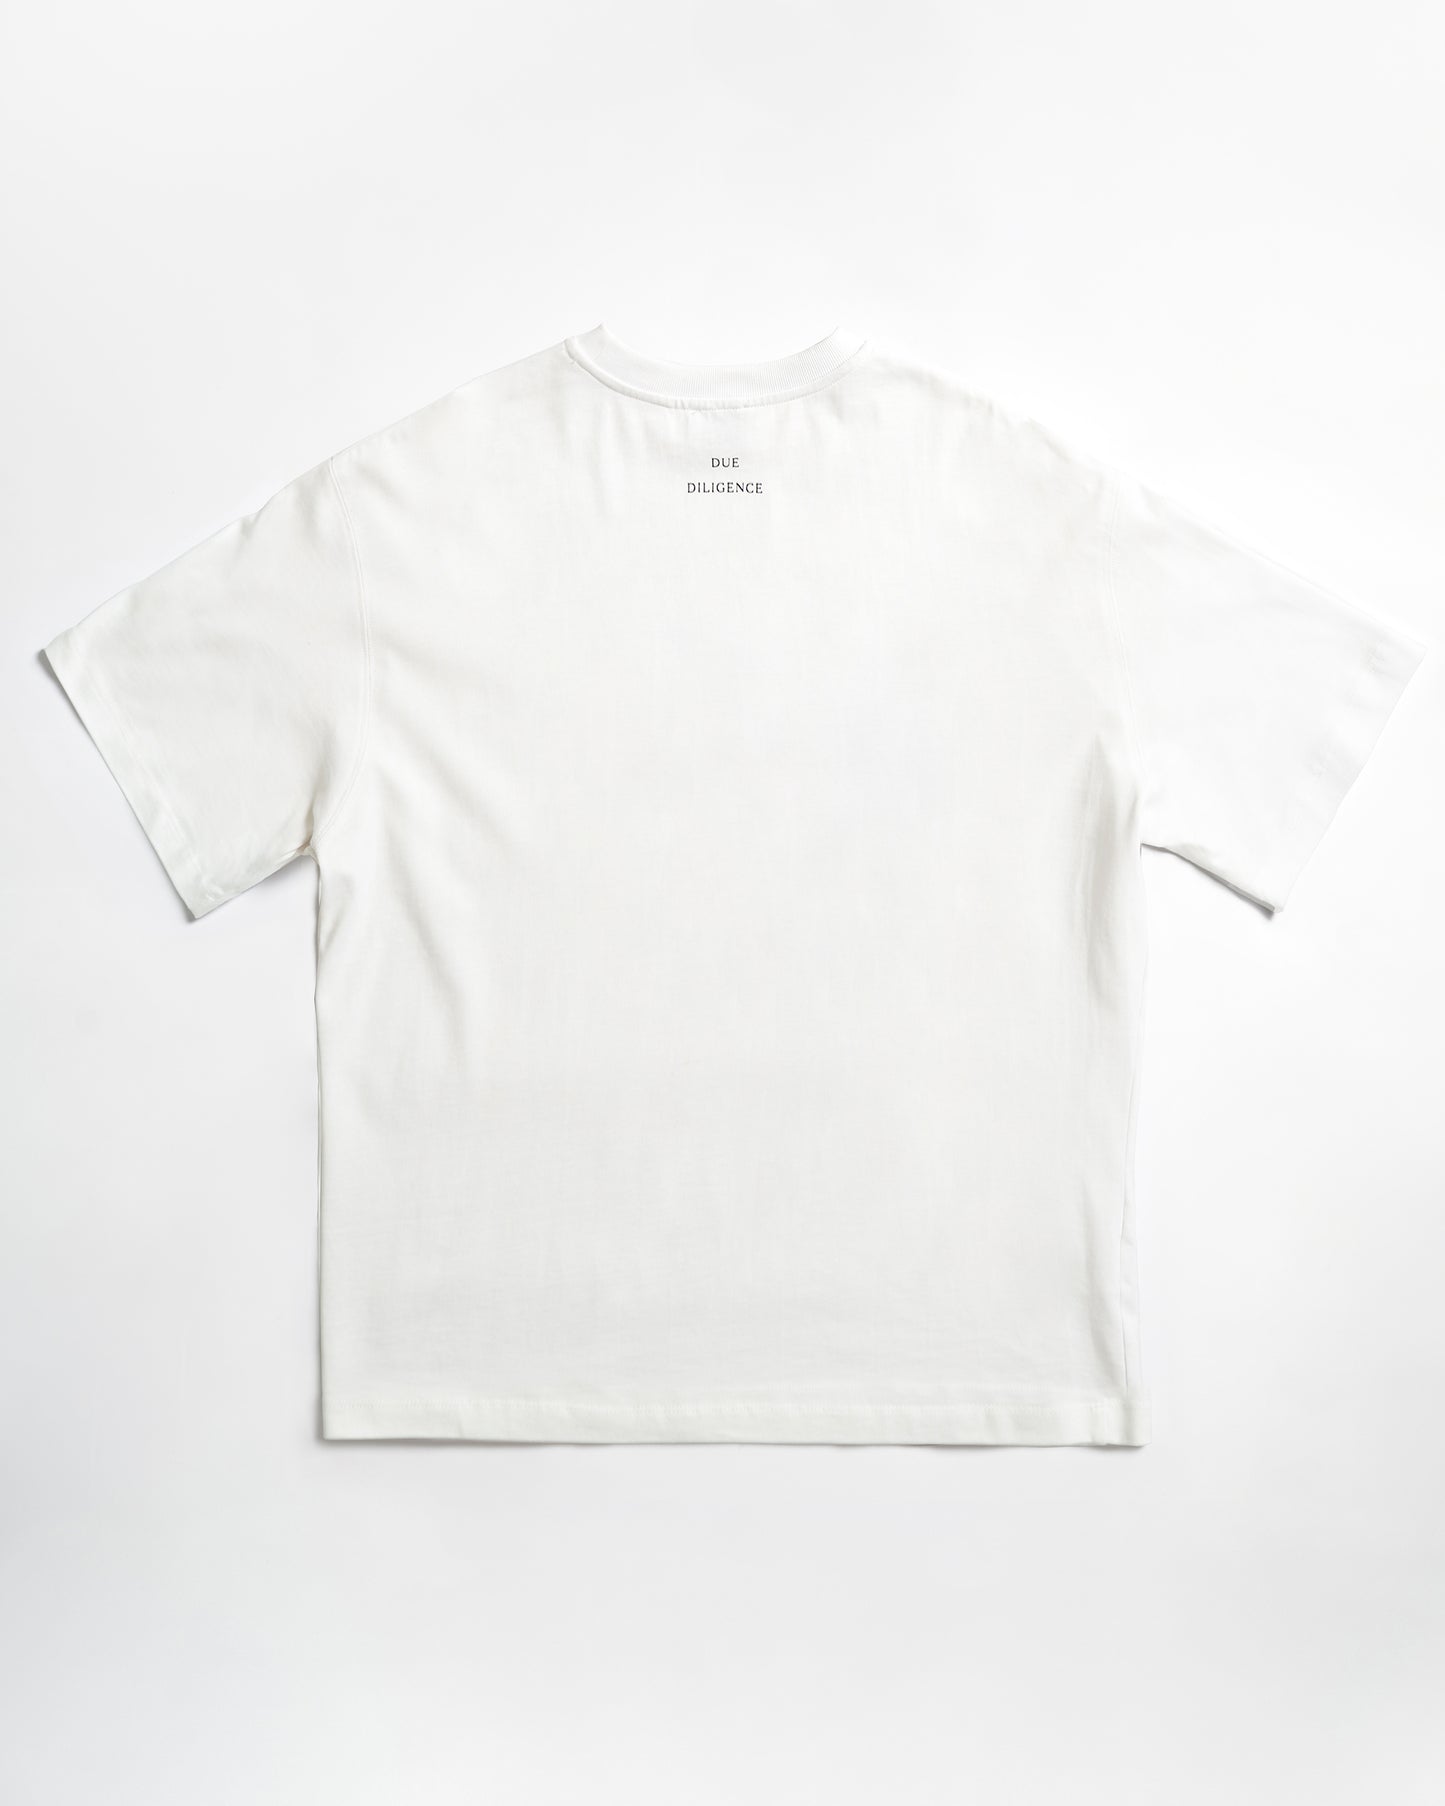 due diligence white tee mens